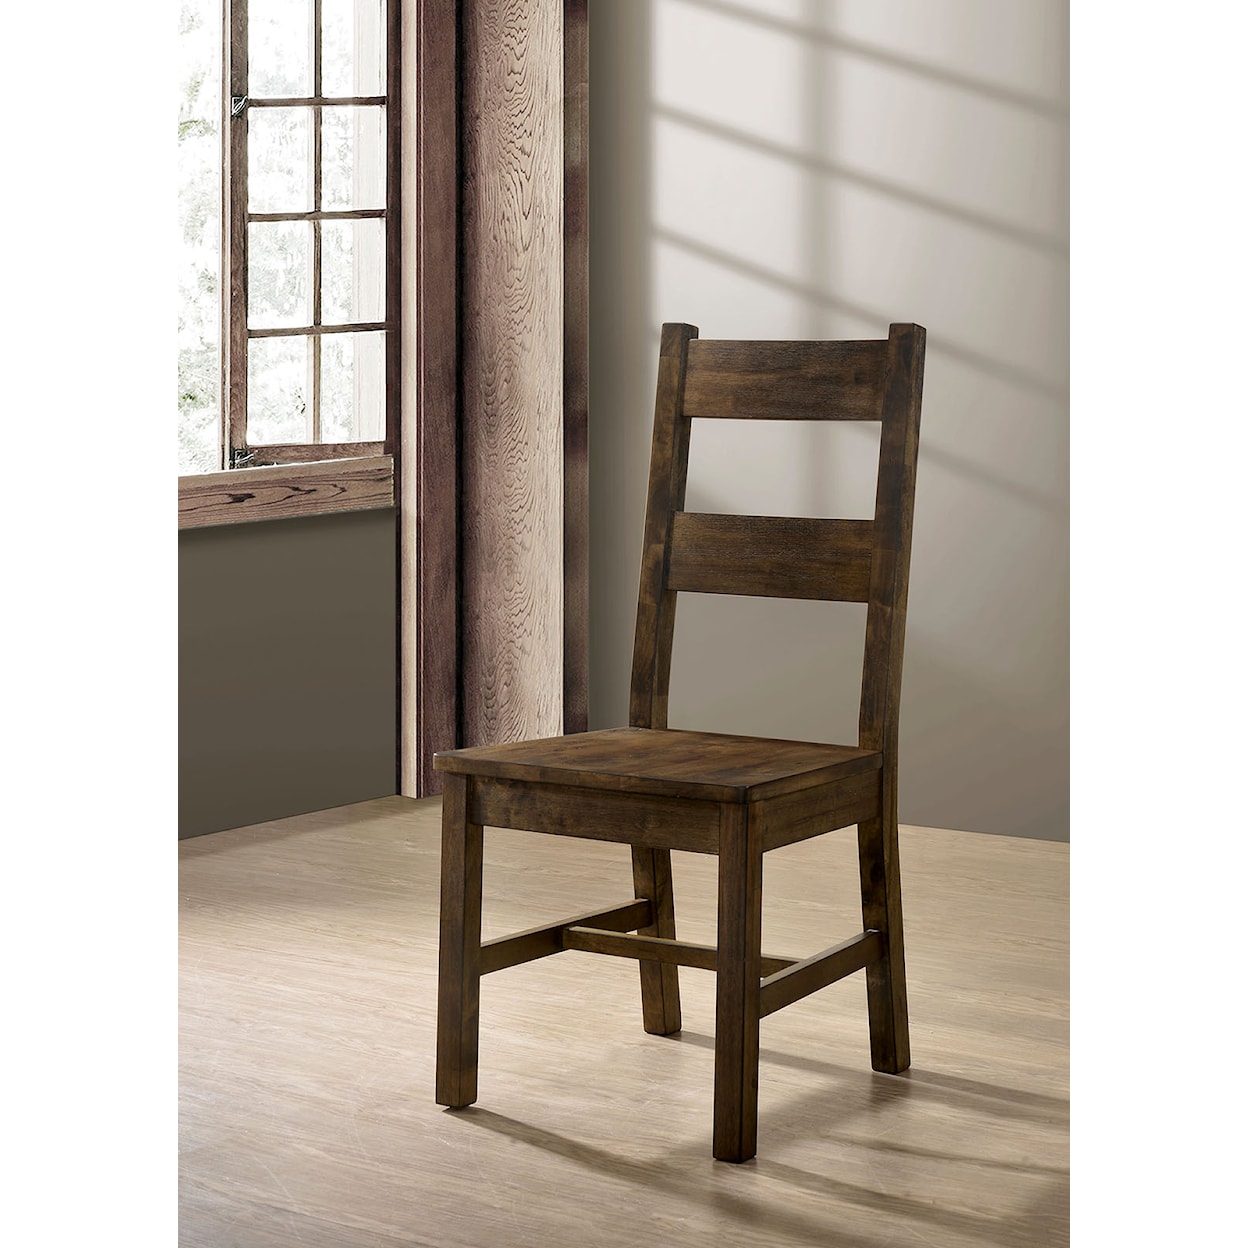 FUSA Kristen Side Chair - Set of Two